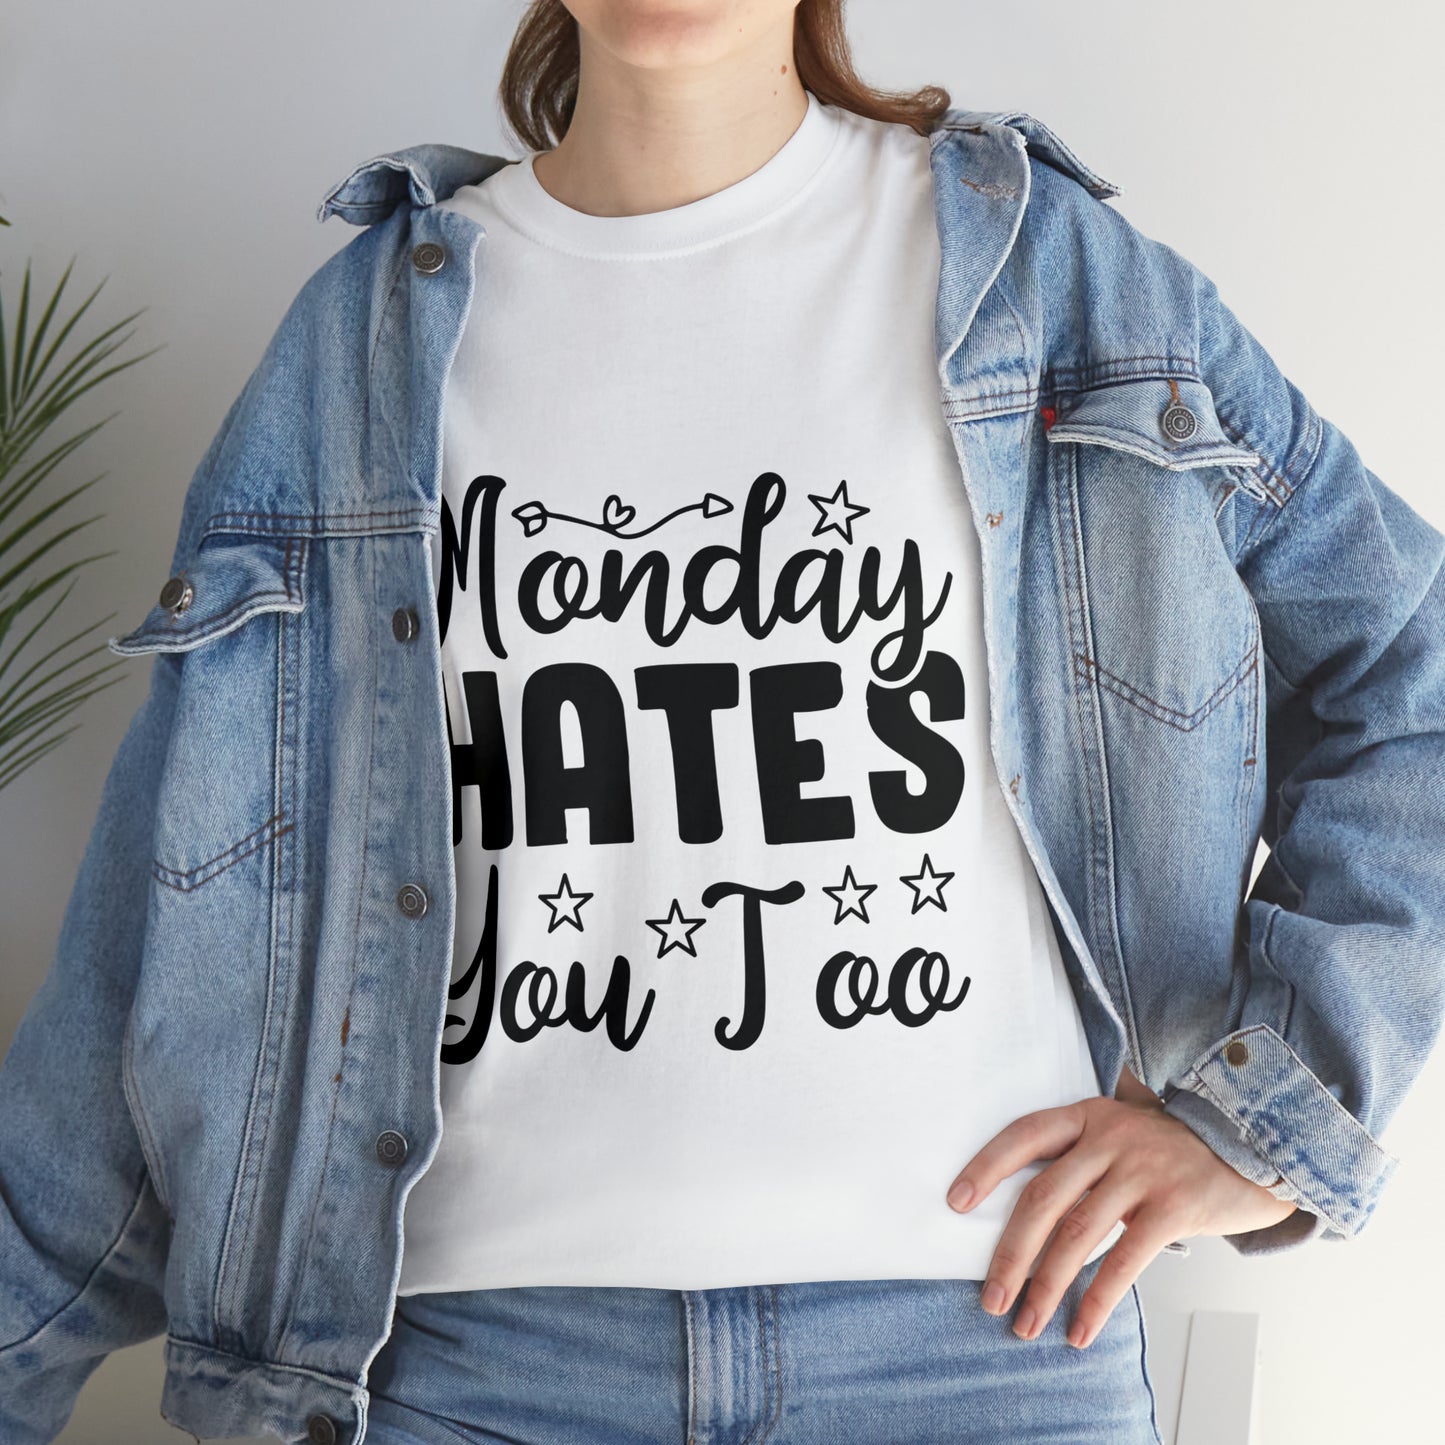 Monday Hates You Too "A self-love internal healing journey"